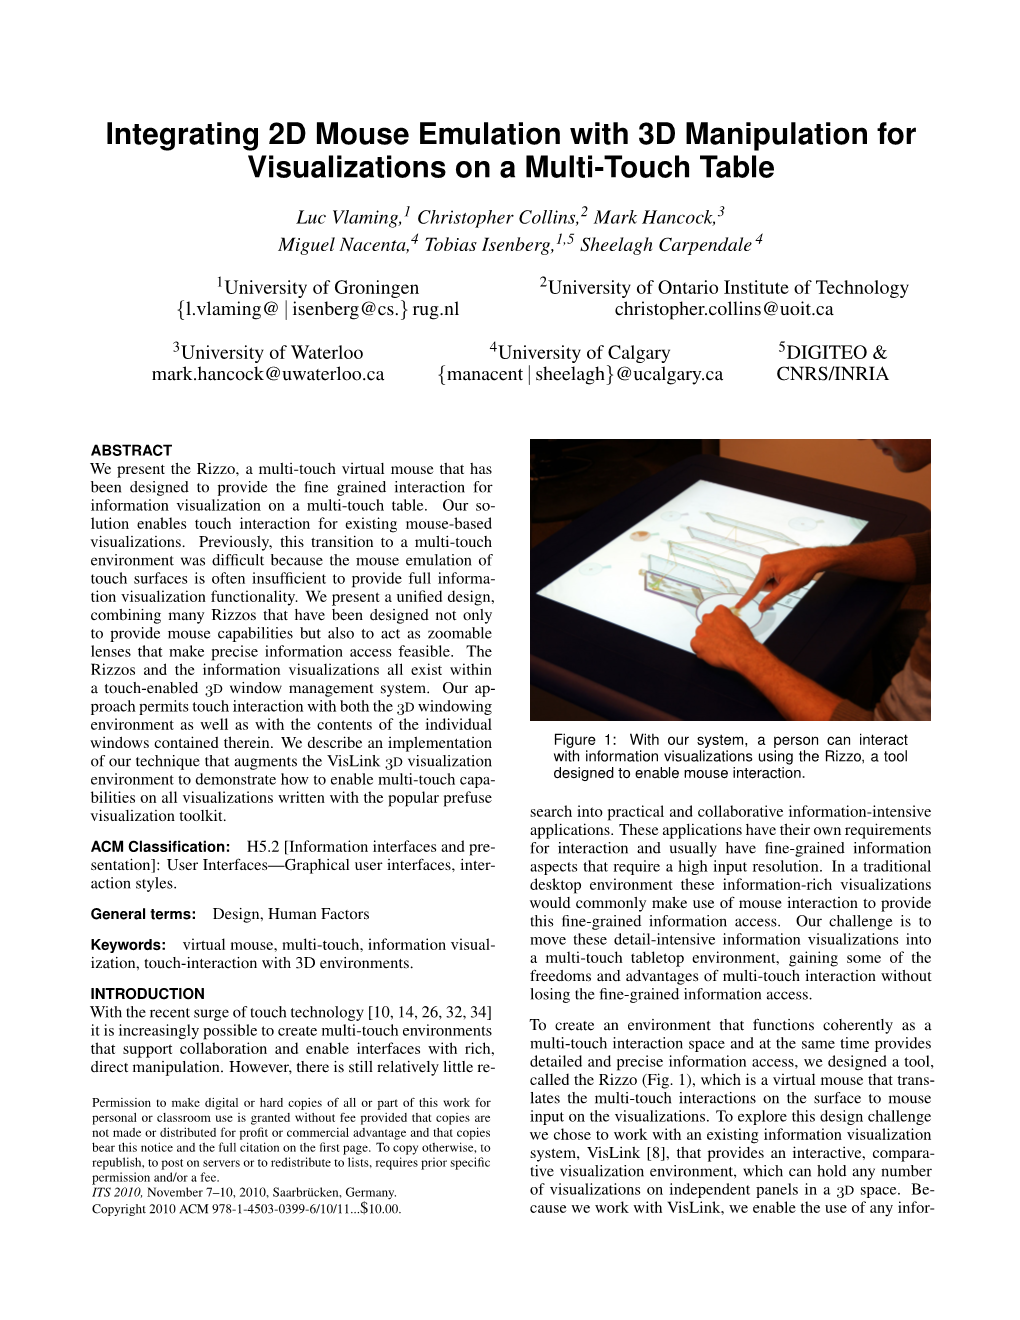 Integrating 2D Mouse Emulation with 3D Manipulation for Visualizations on a Multi-Touch Table